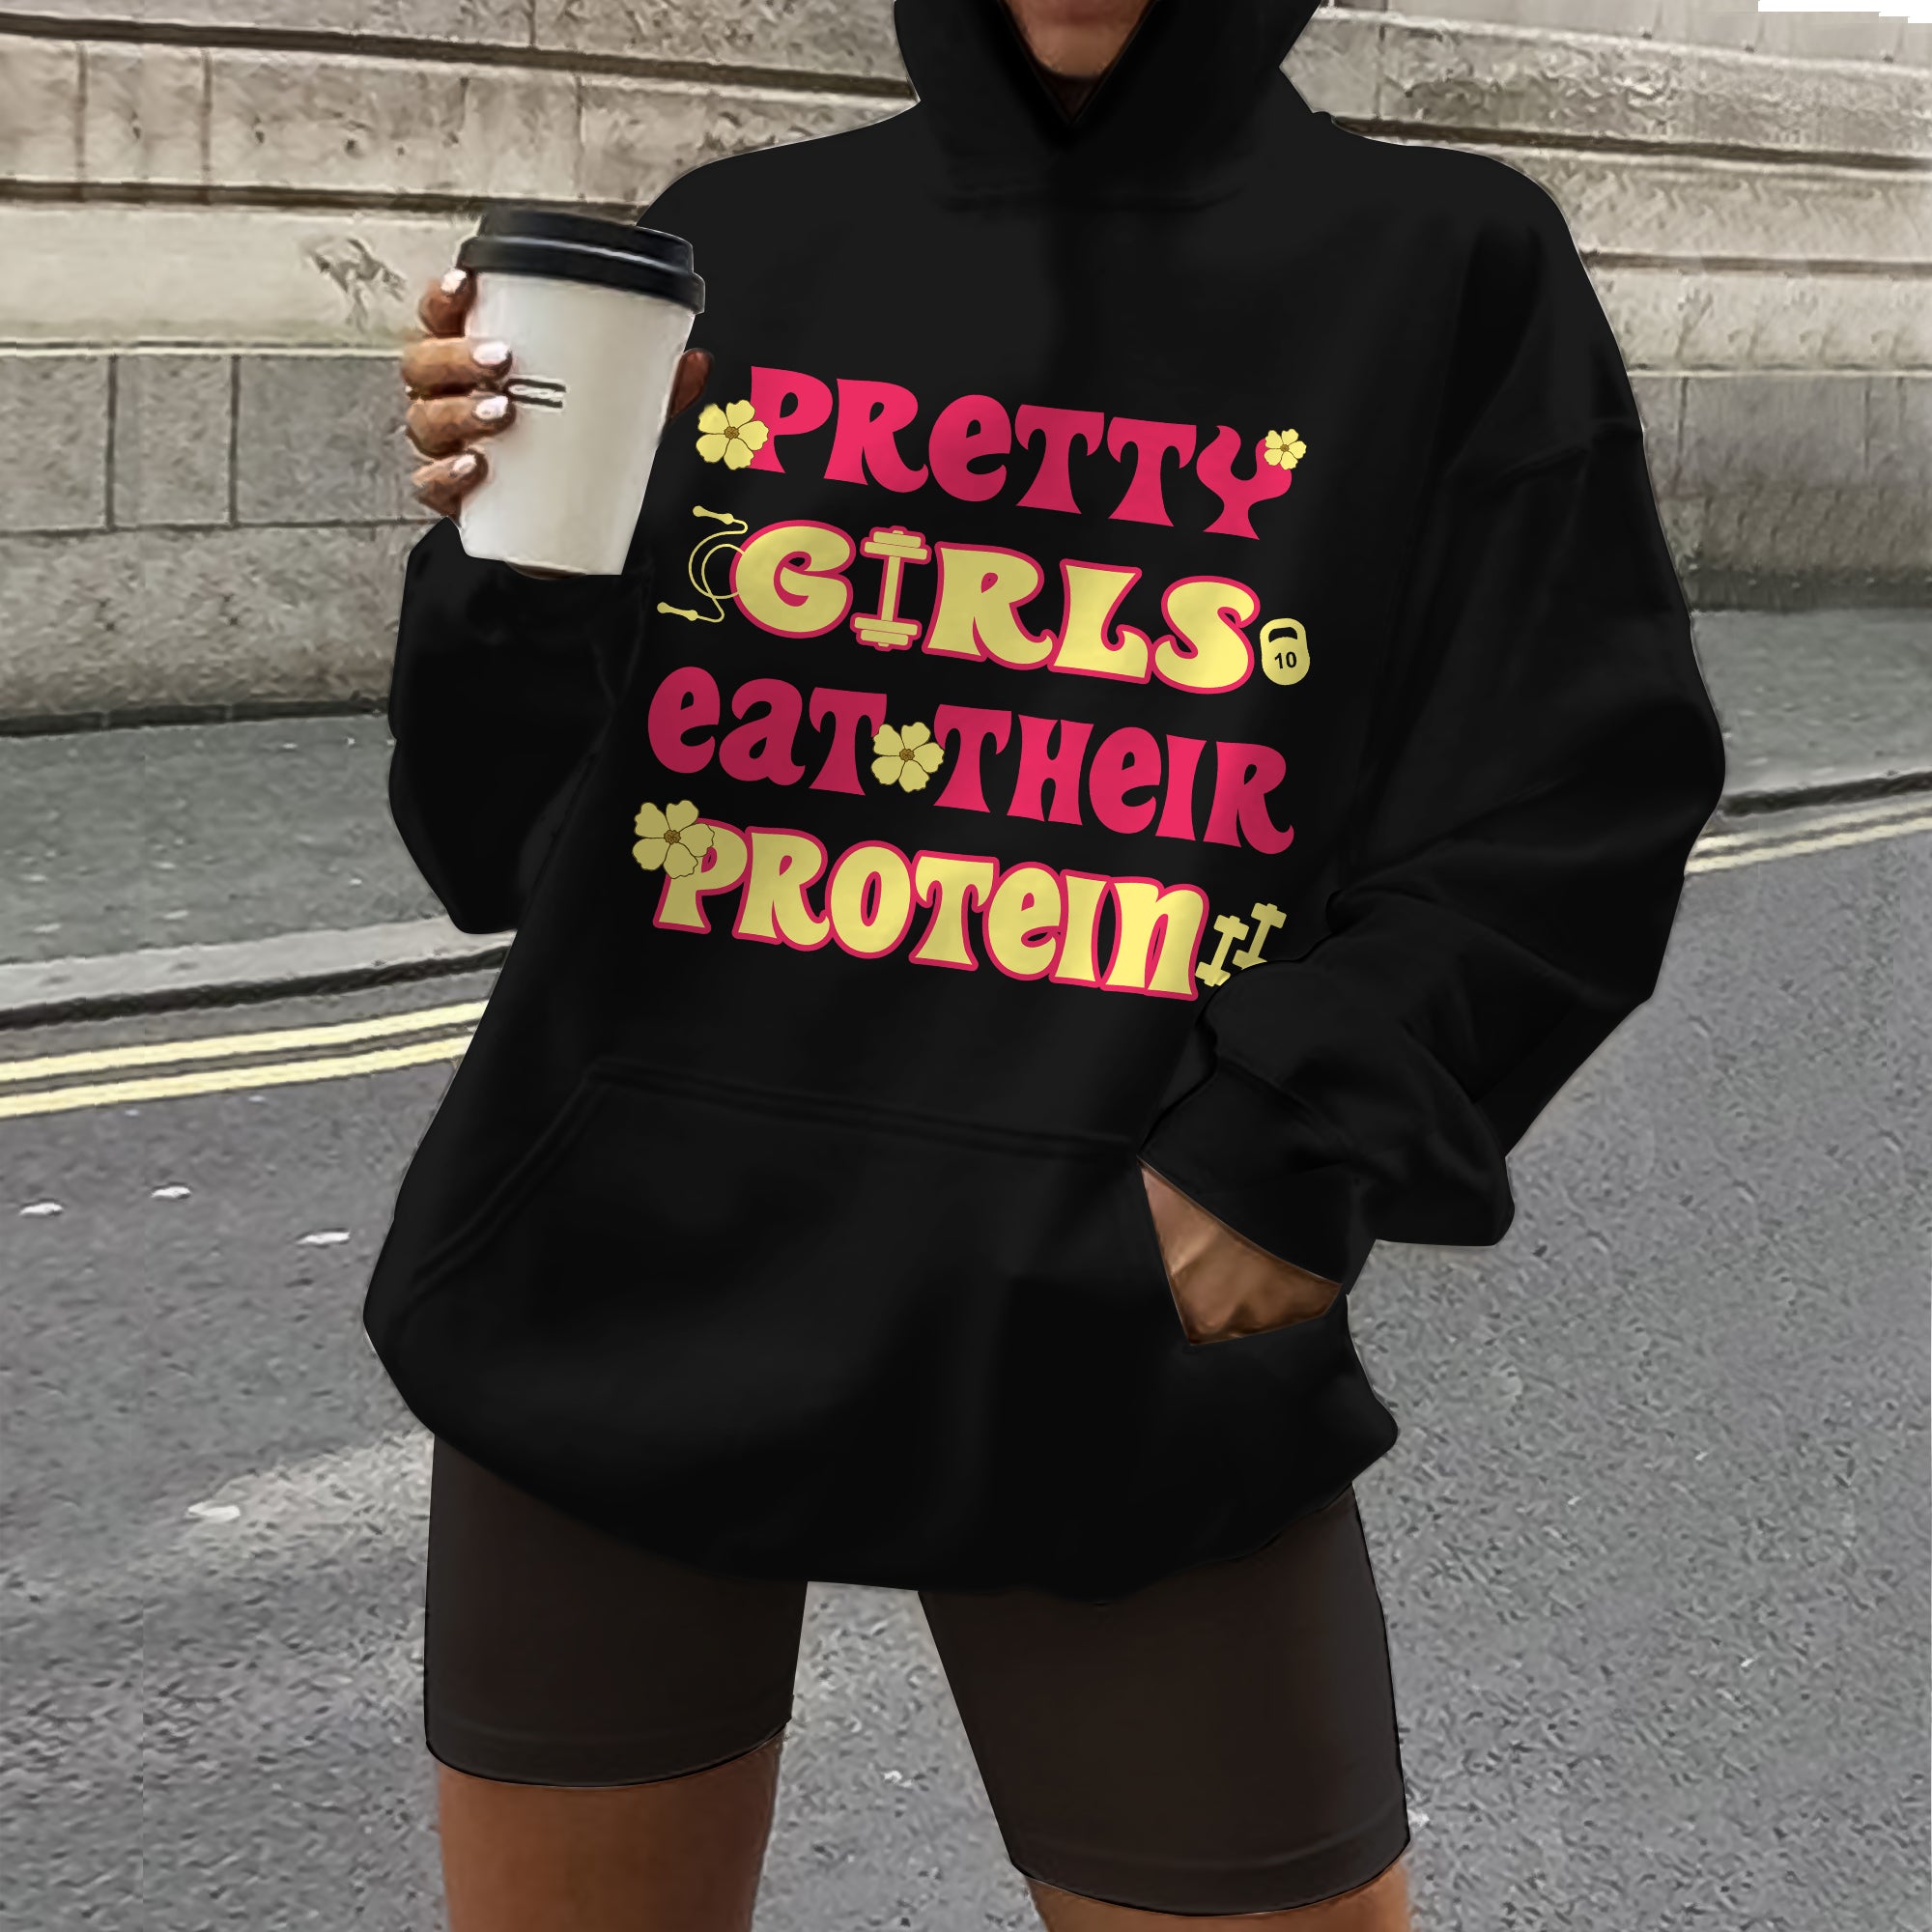 Pump Cover Gym Hoodie Weightlifting Shirt Pretty Girls Eat Their Protein 11092